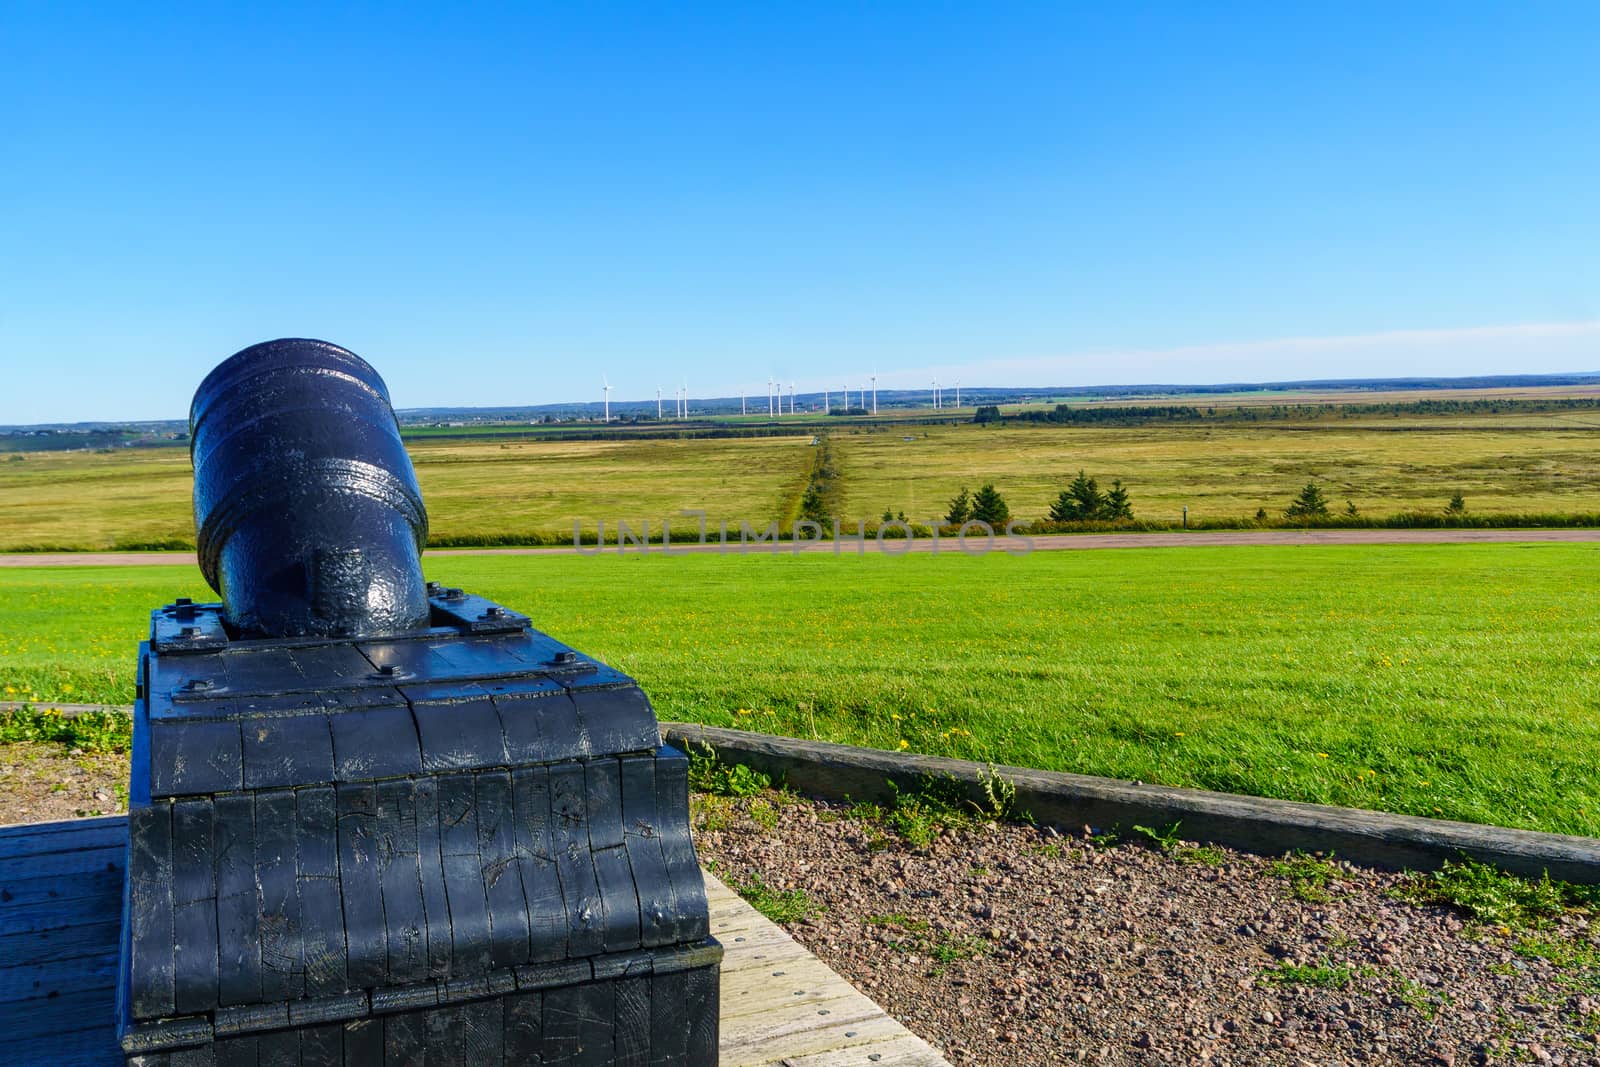 View of the historical fortress of Fort Beausejour, in New Brunswick, Canada